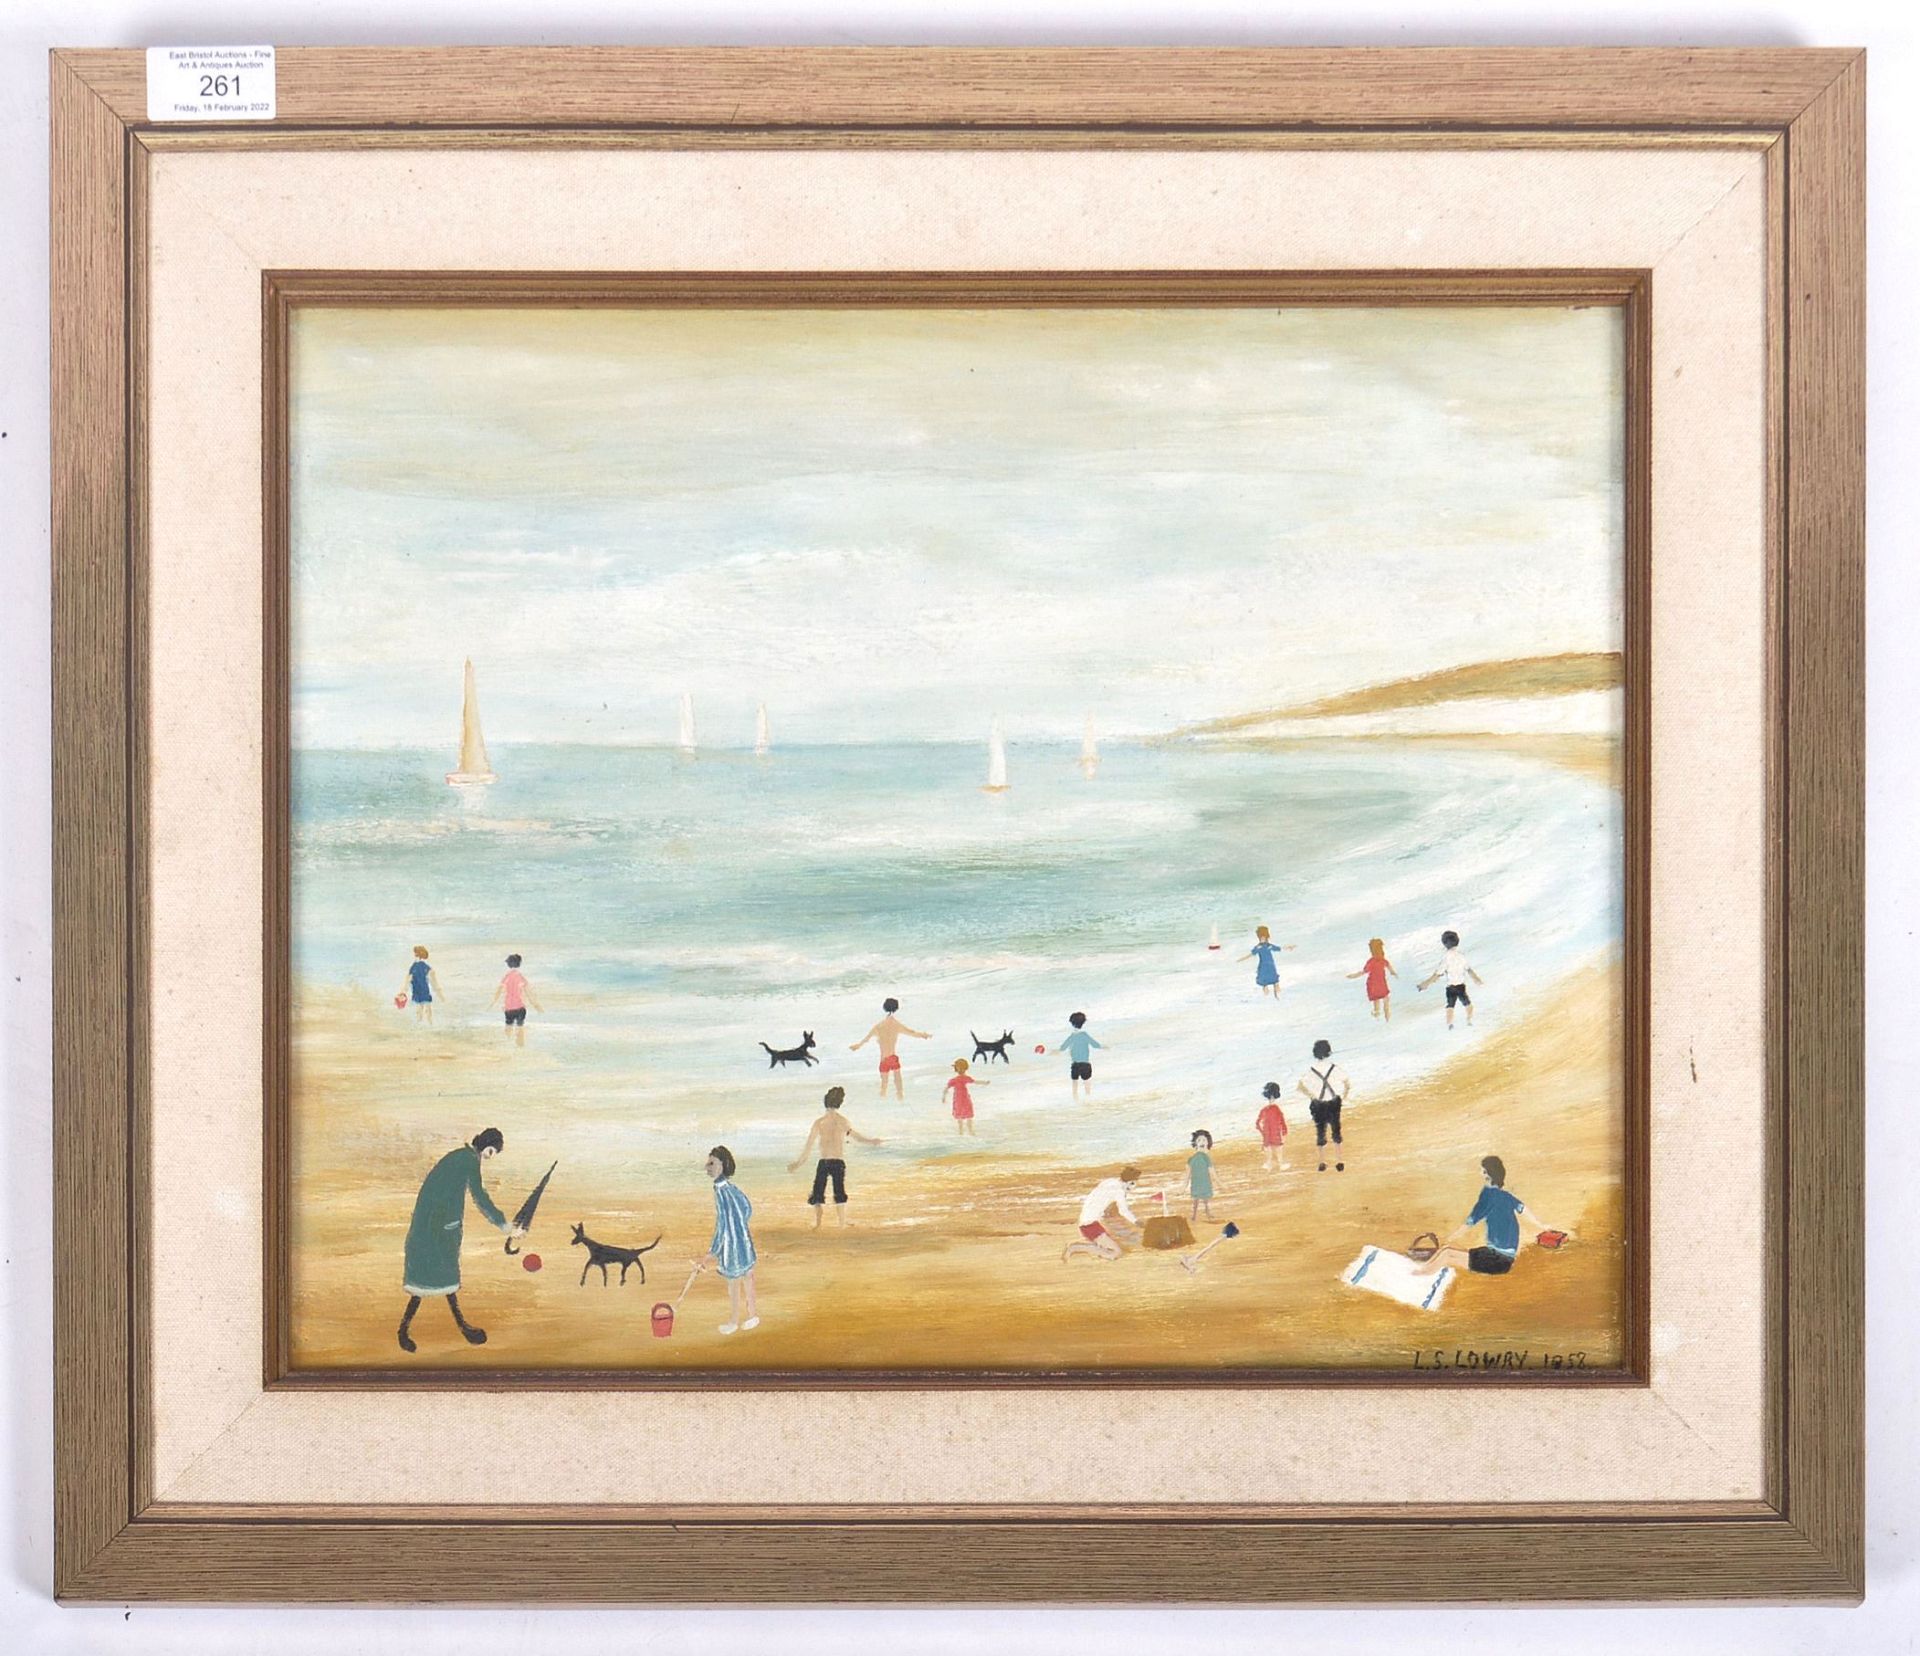 MID 20TH CENTURY OIL ON BOARD PAINTING IN THE MANNER OF LOWRY